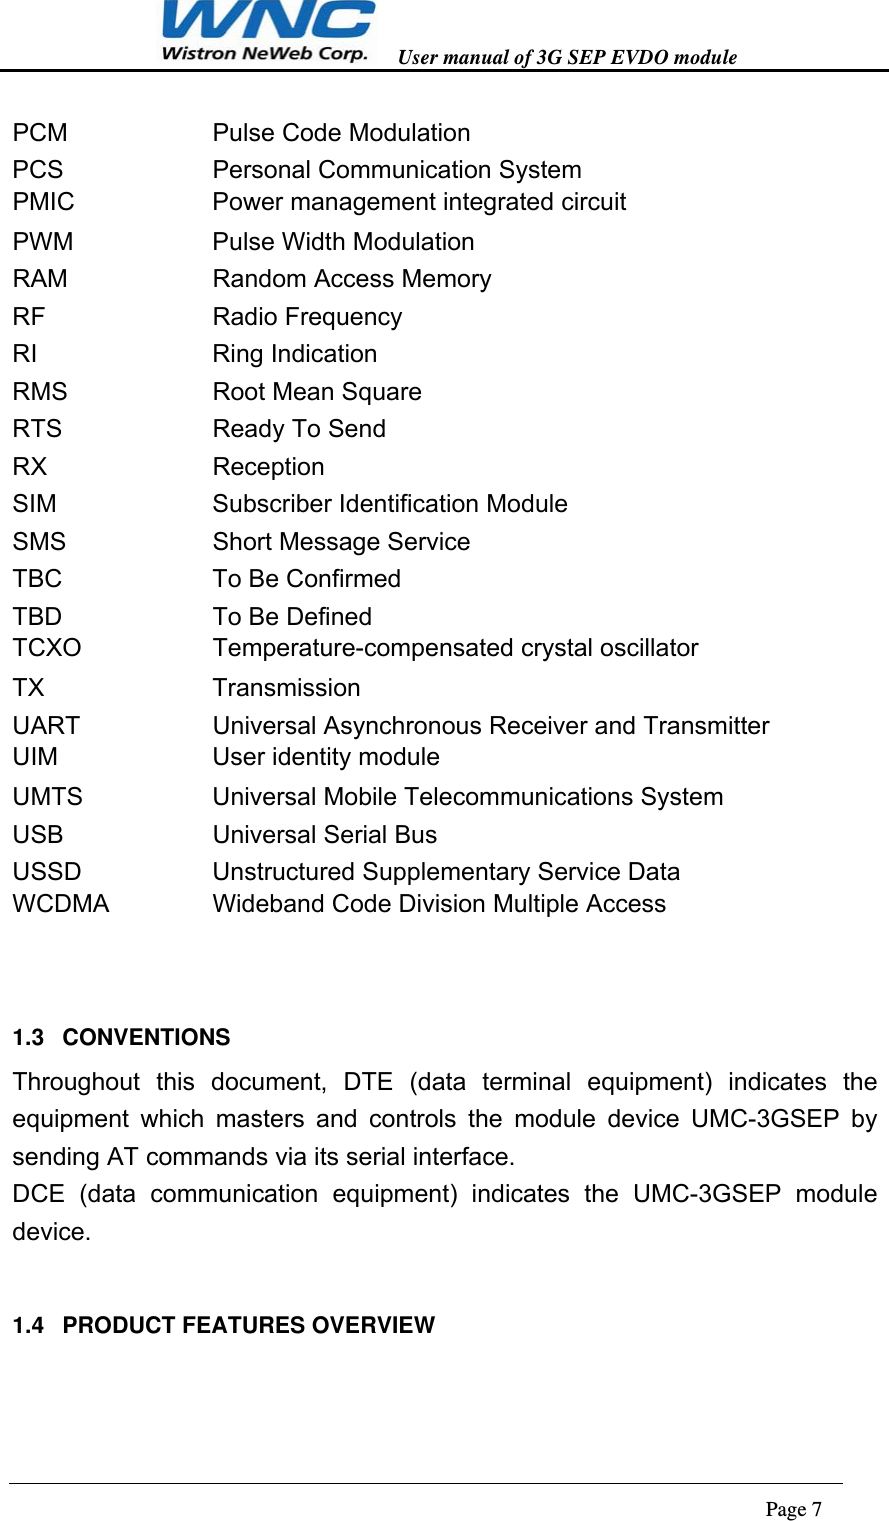   User manual of 3G SEP EVDO module                                                                      Page 7  PCM   Pulse Code Modulation PCS   Personal Communication System PMIC    Power management integrated circuit   PWM   Pulse Width Modulation RAM   Random Access Memory RF    Radio Frequency RI    Ring Indication RMS   Root Mean Square RTS        Ready To Send RX    Reception SIM    Subscriber Identification Module SMS   Short Message Service TBC   To Be Confirmed TBD   To Be Defined TCXO    Temperature-compensated crystal oscillator   TX    Transmission UART   Universal Asynchronous Receiver and Transmitter UIM    User identity module  UMTS   Universal Mobile Telecommunications System USB   Universal Serial Bus USSD   Unstructured Supplementary Service Data WCDMA      Wideband Code Division Multiple Access    1.3 CONVENTIONS Throughout this document, DTE (data terminal equipment) indicates the equipment which masters and controls the module device UMC-3GSEP by sending AT commands via its serial interface. DCE (data communication equipment) indicates the UMC-3GSEP module device.  1.4 PRODUCT FEATURES OVERVIEW  